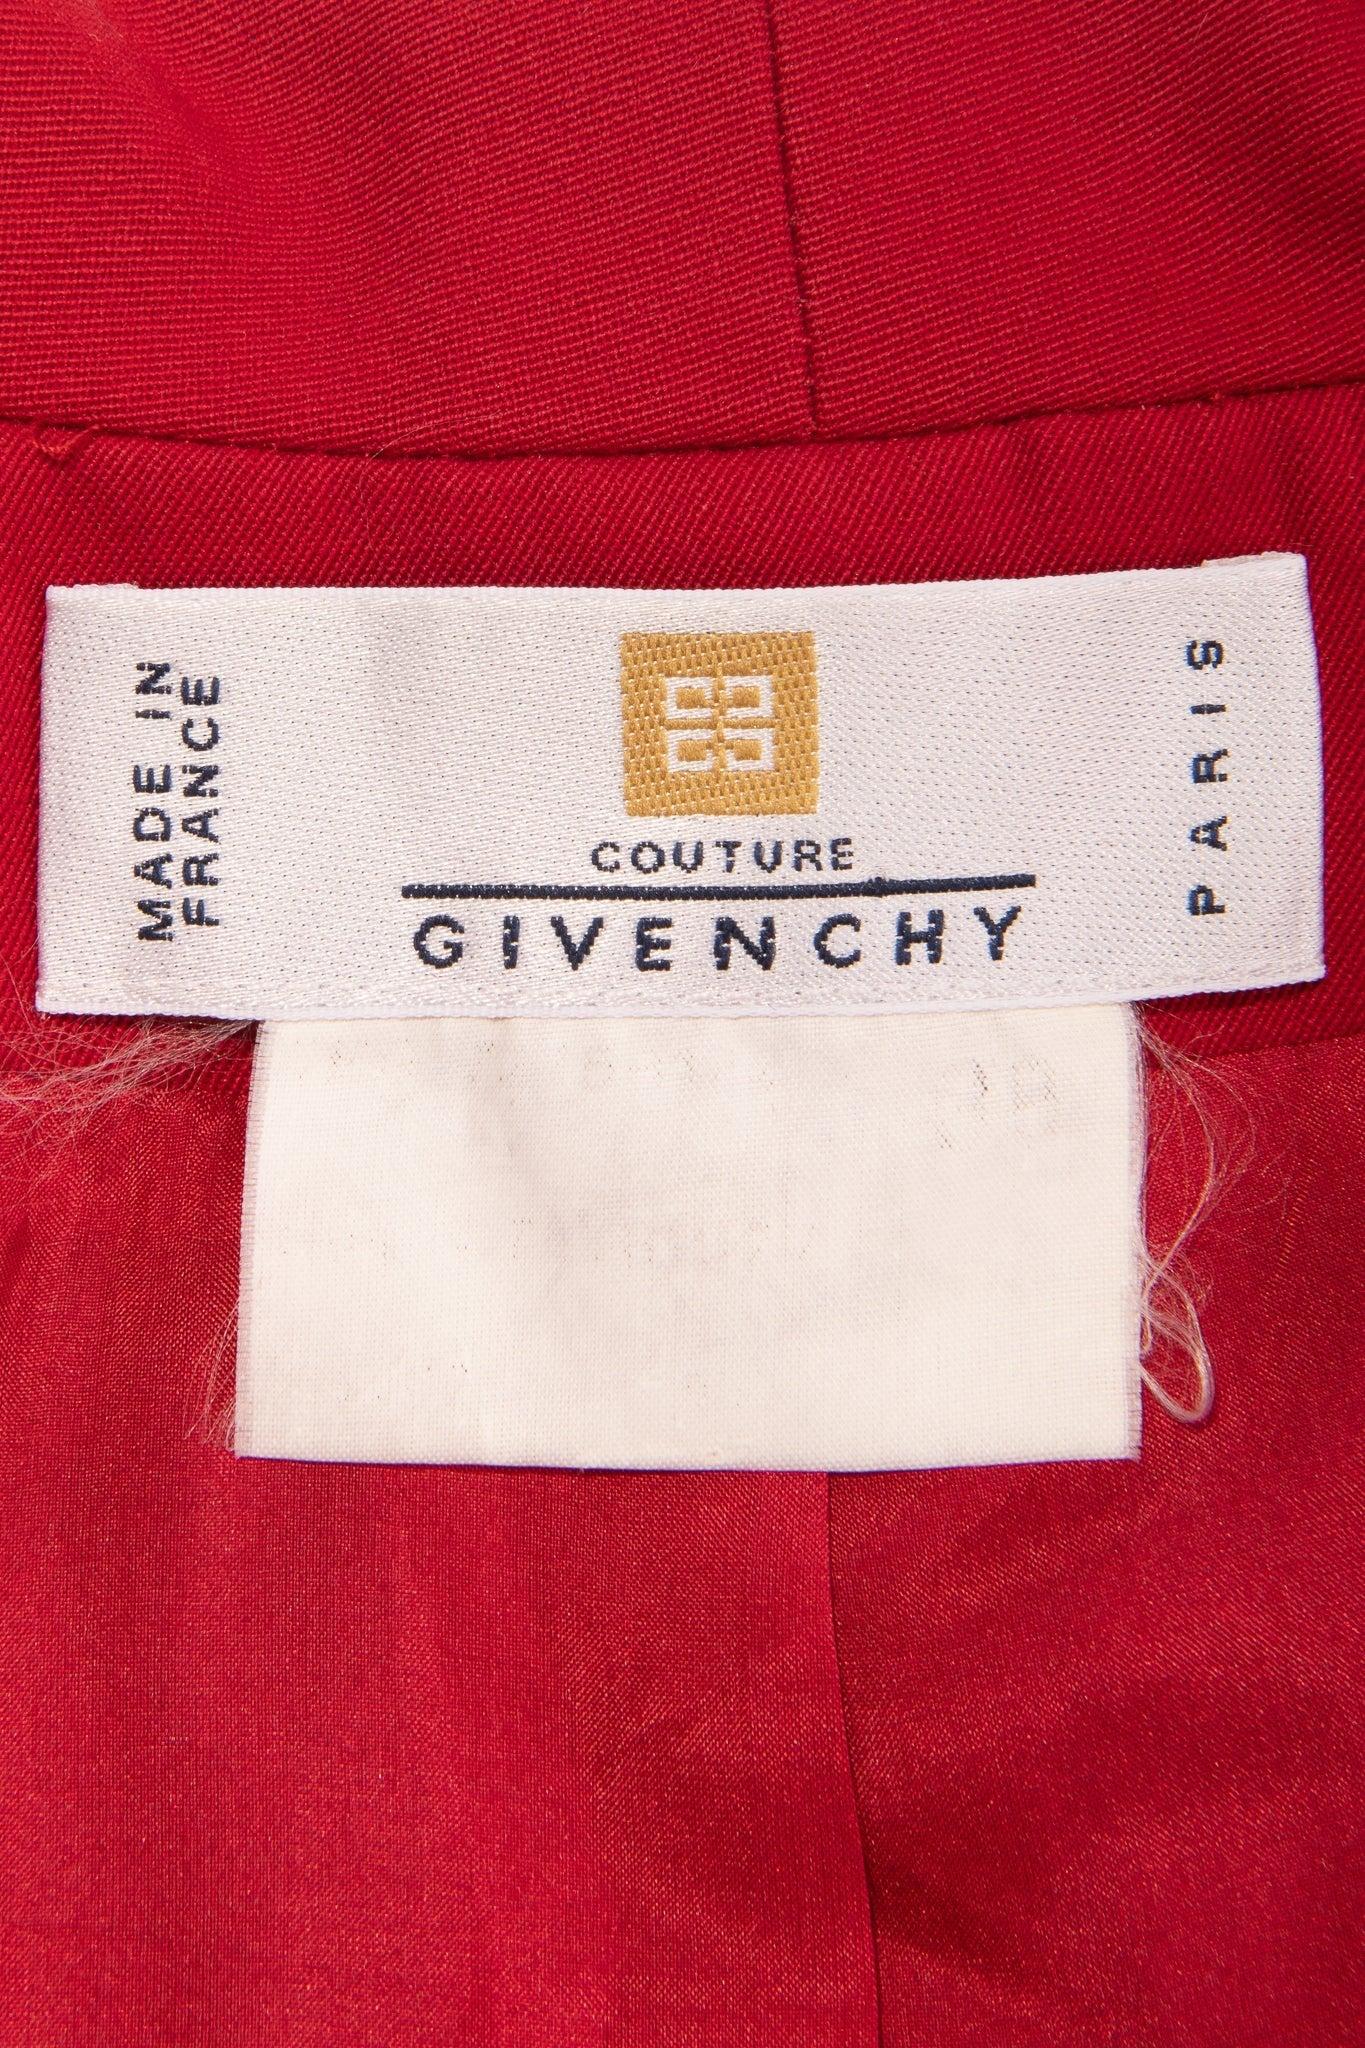 S/S 1997 Givenchy Long Red Jacket and Wrap Trouser Set 1